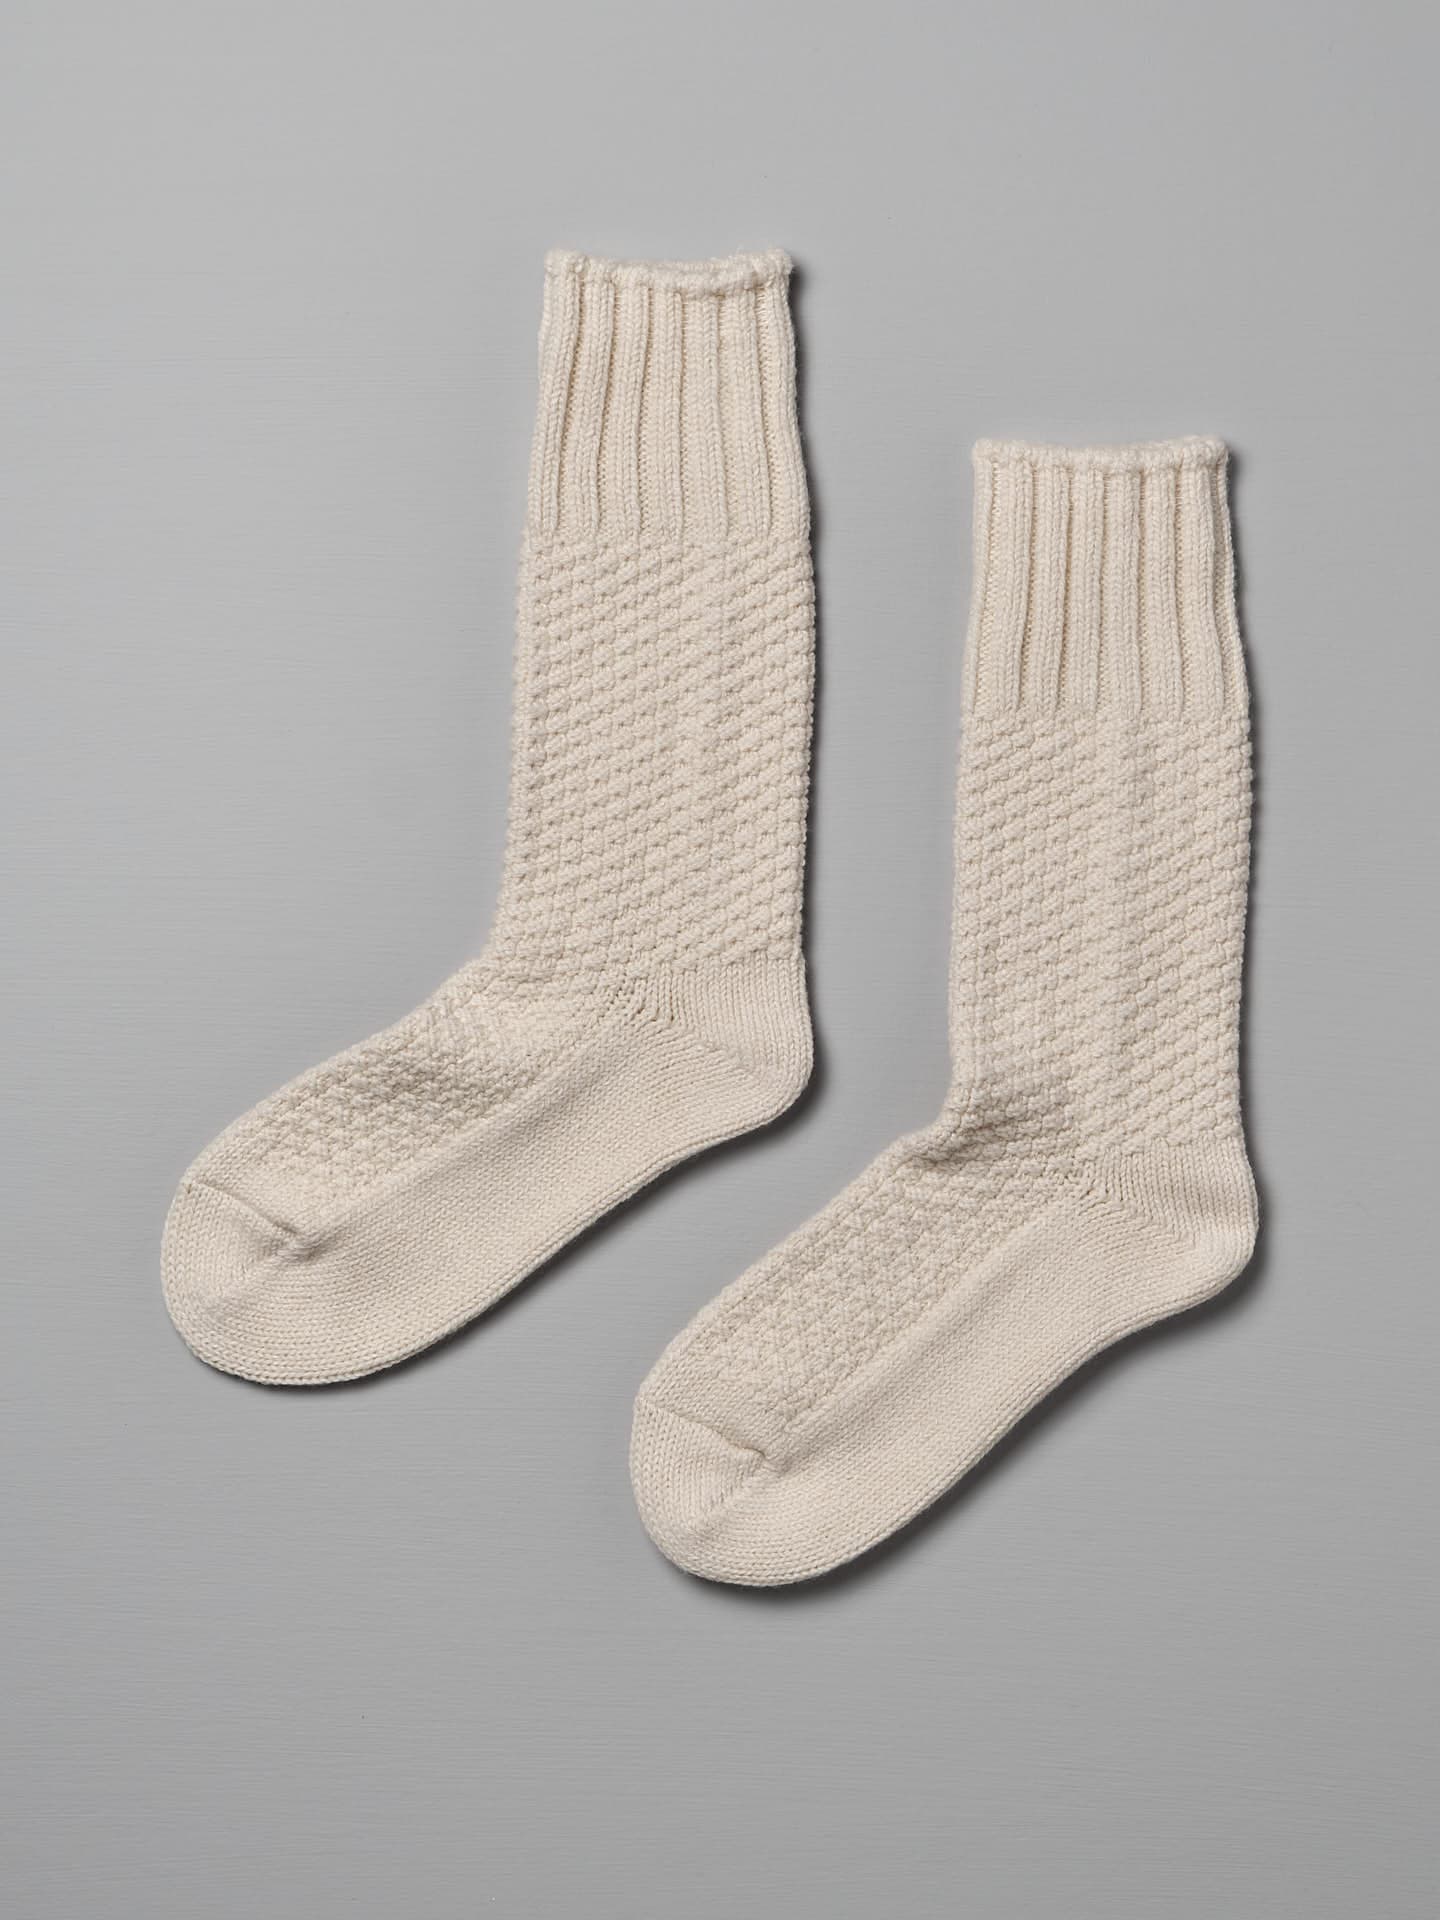 A pair of Nishiguchi Kutsushita Wool Cotton Boot Socks – Ivory with ribbed cuffs and a textured pattern on a gray background, available in Men's US and Women's US sizes.